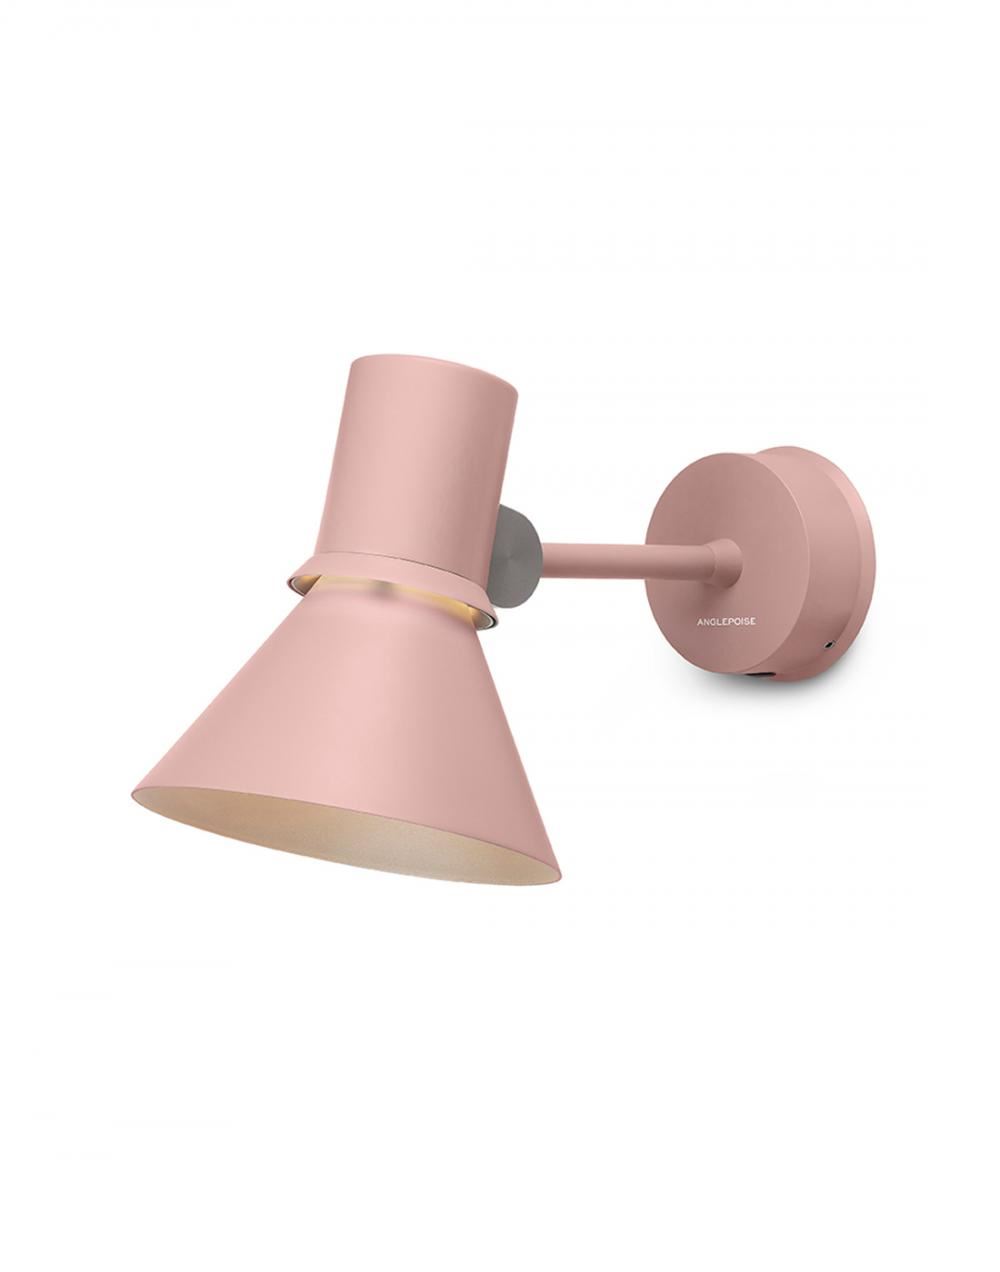 Anglepoise Type 80 Wall Light Rose Pink